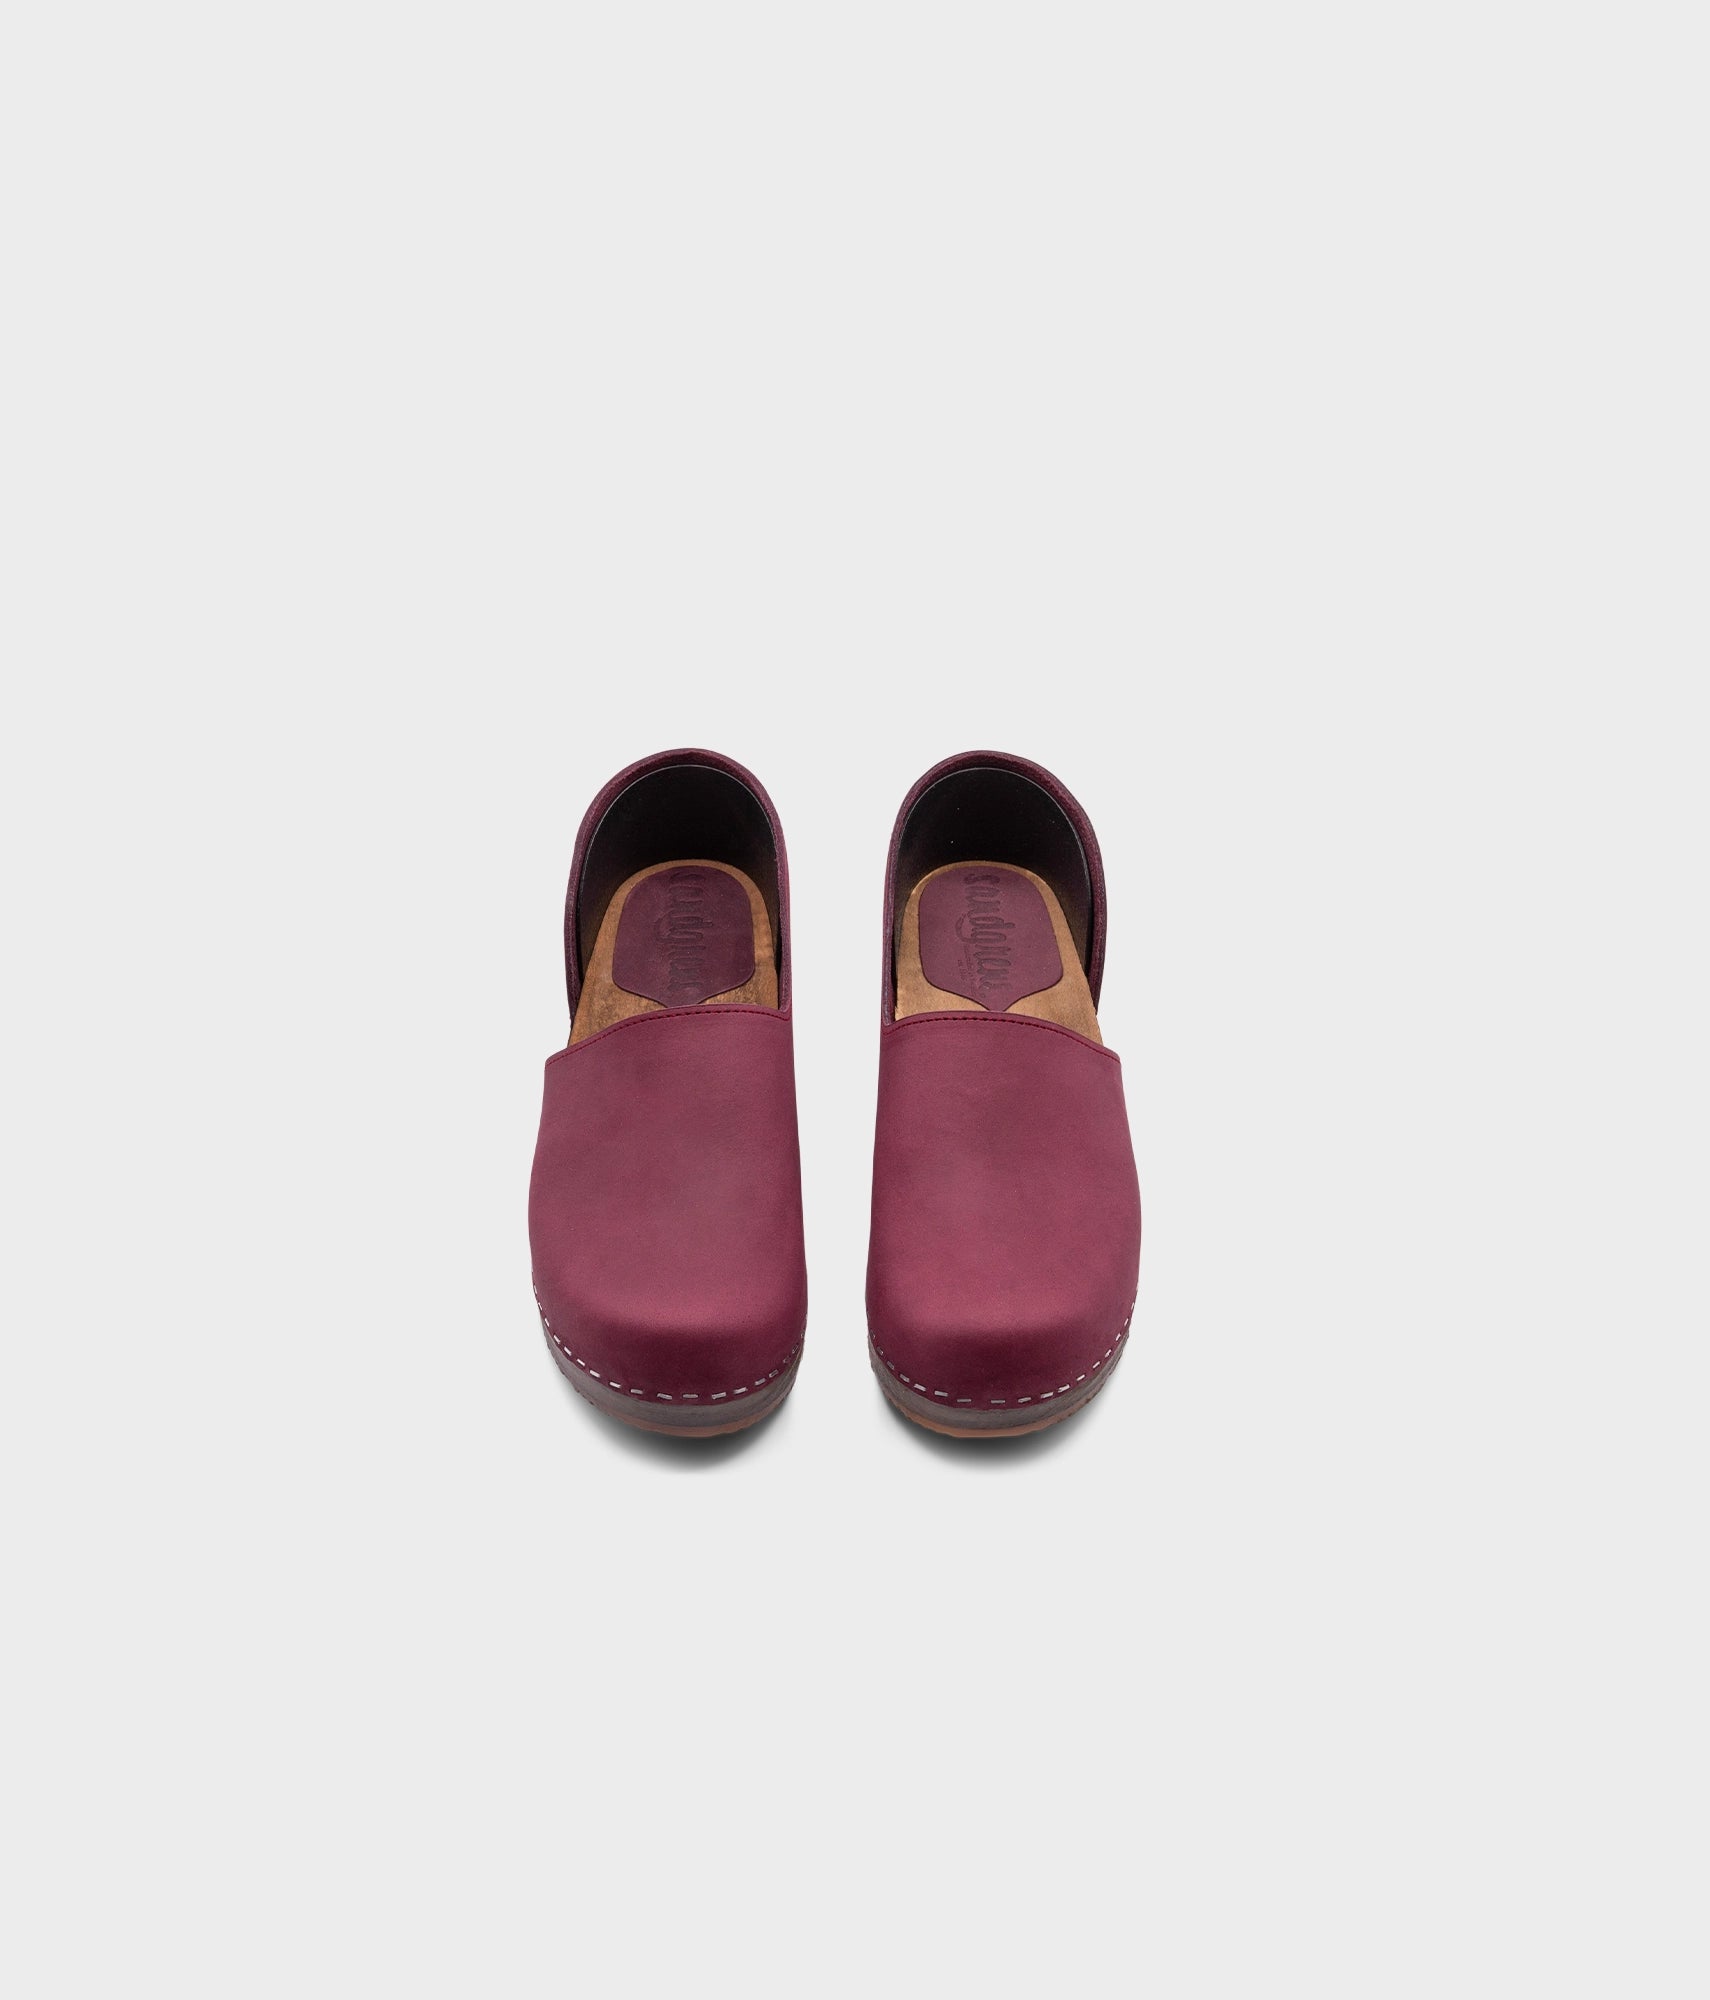 low heeled closed-back clogs in dark purple nubuck leather stapled on a dark wooden base